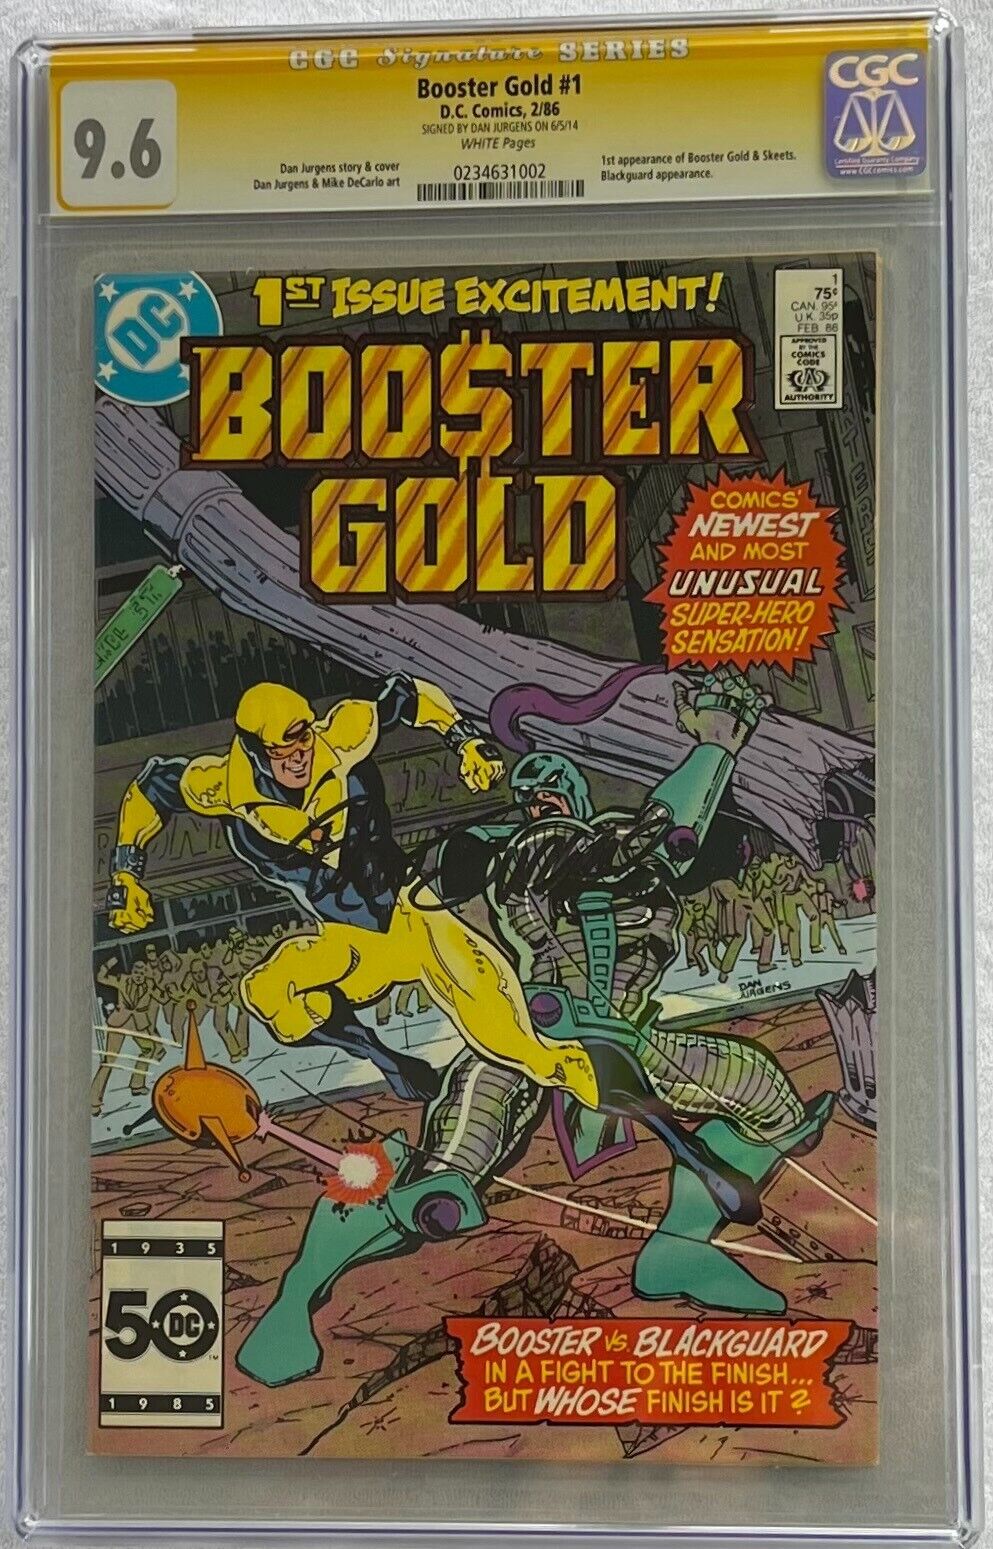 BOOSTER GOLD #1 1986 CGC SS 9.6 White Pg 1st Appearance of Signed by Dan Jurgens